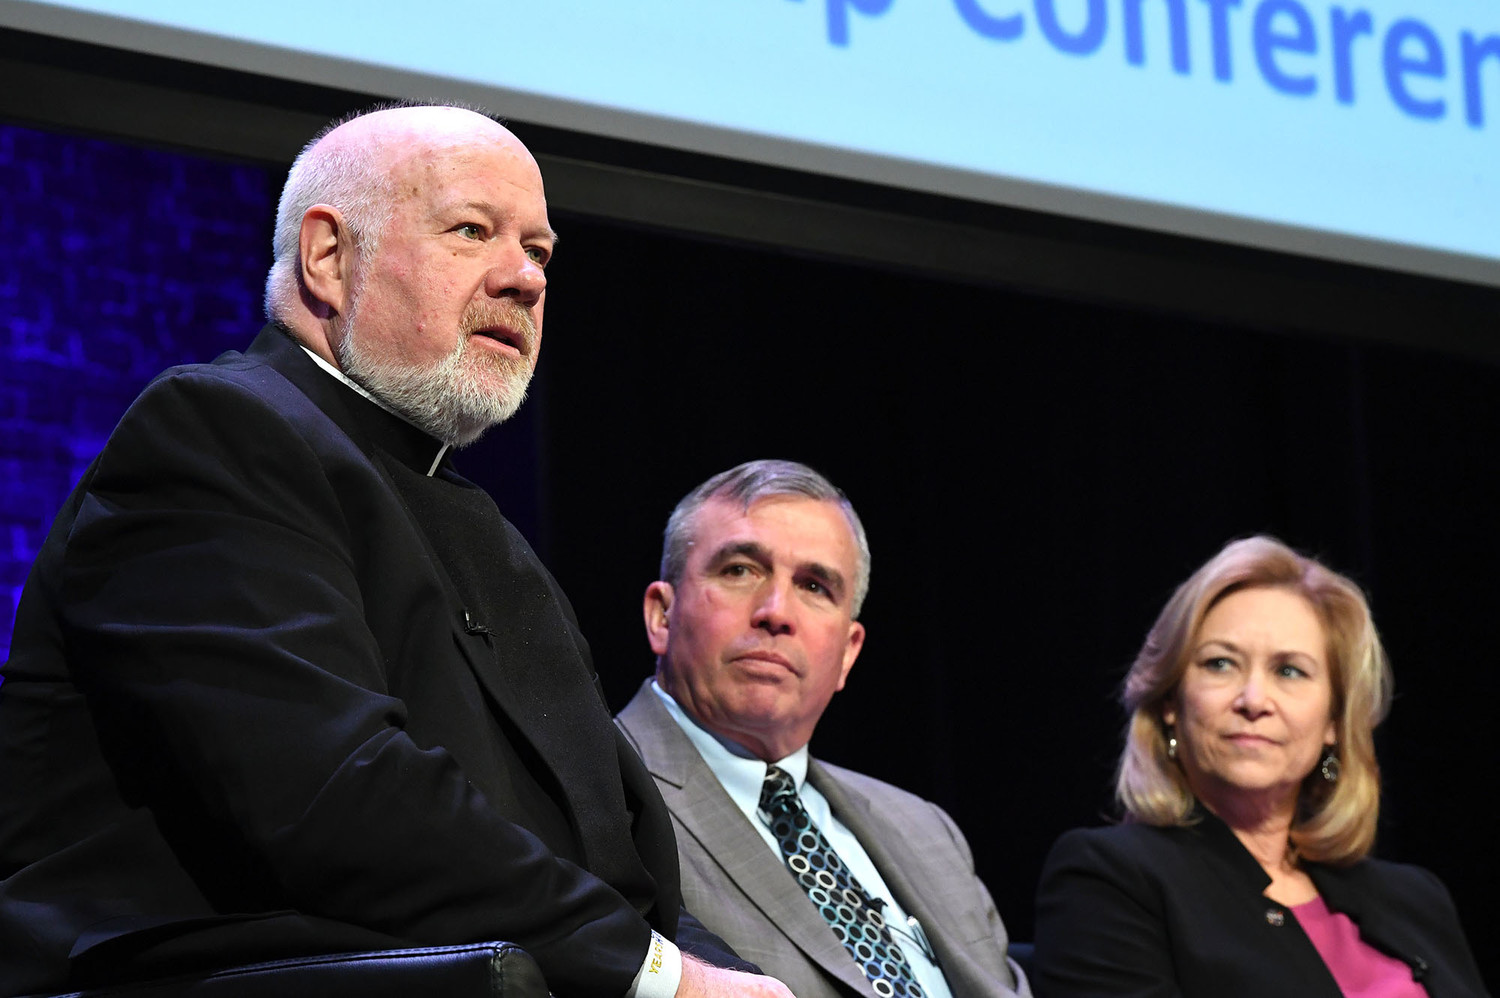 Msgr. Kevin Sullivan, executive director of archdiocesan Catholic Charities, speaks as retired U.S. Marine Corps Lieutenant General John Wissler and Janet Petro, deputy director of NASA’s John F. Kennedy Space Center in Florida, listen to their fellow panelist.